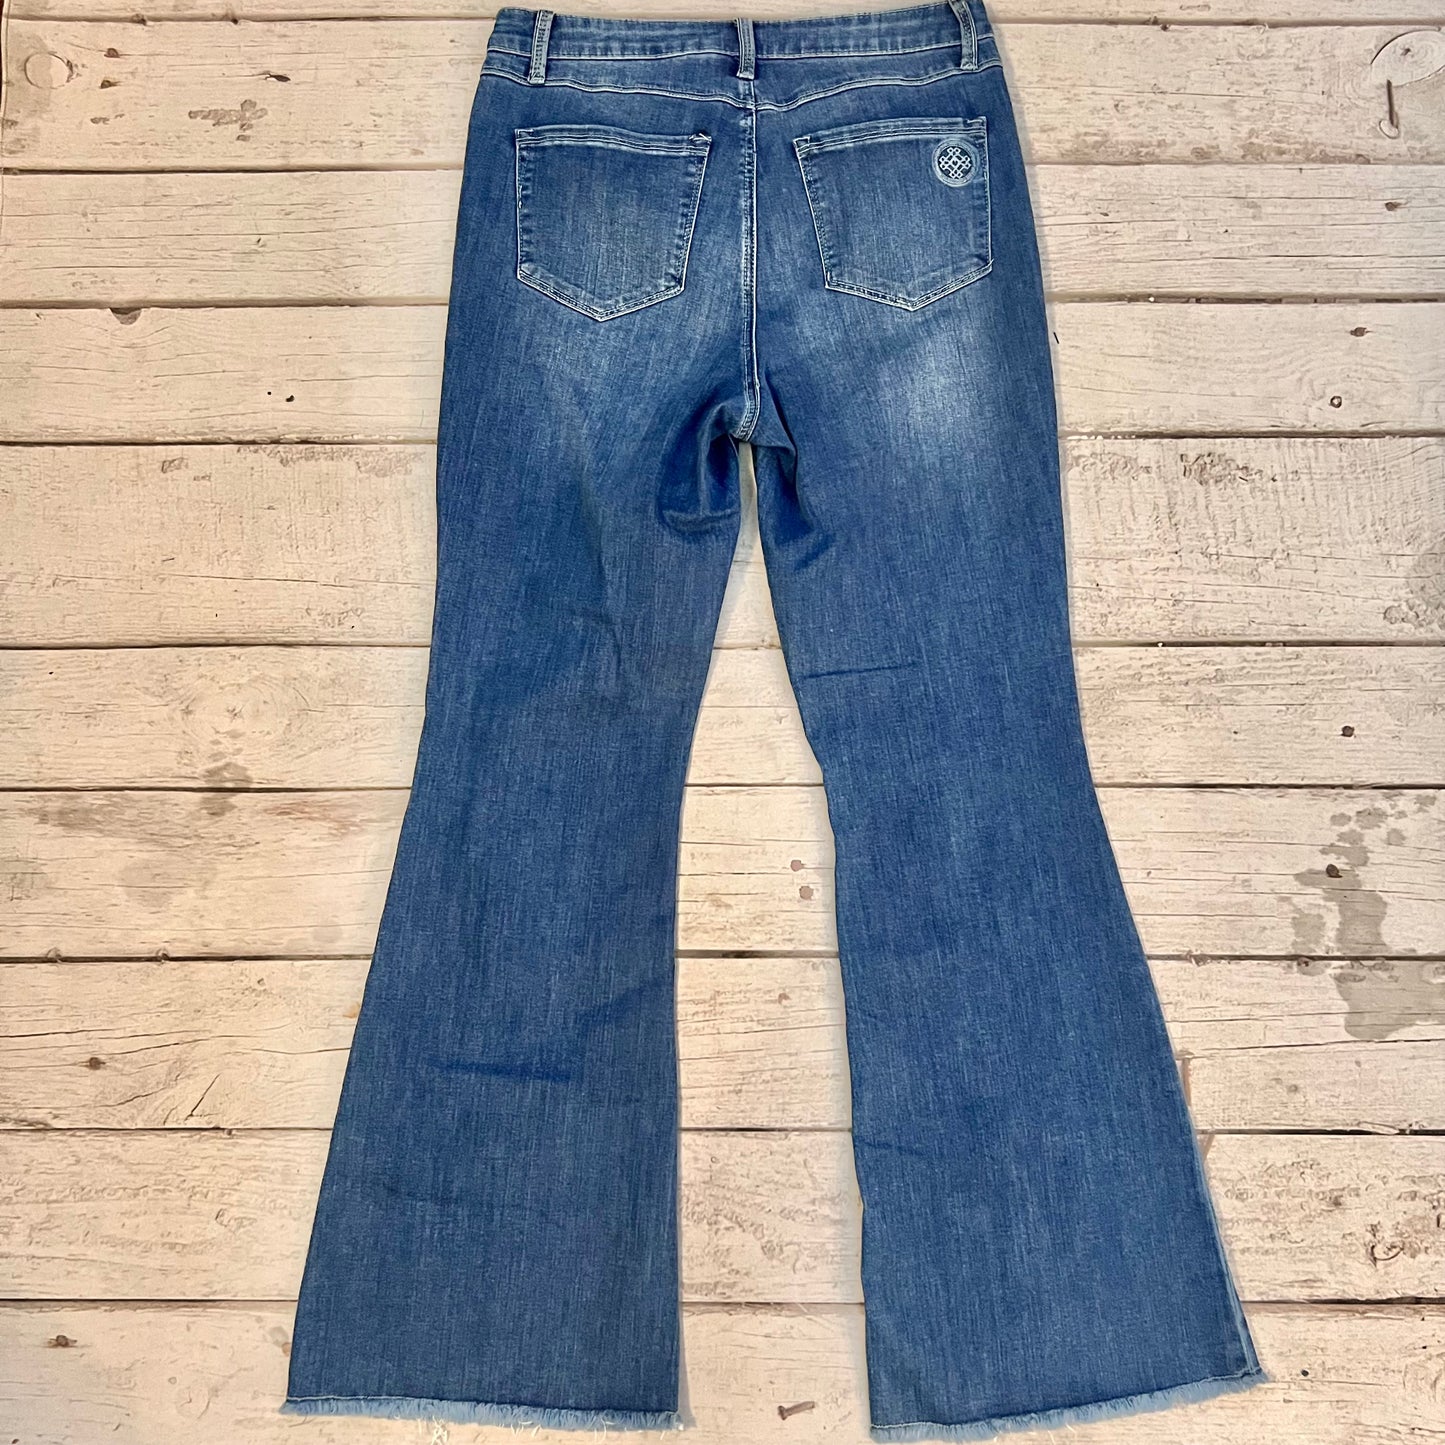 Jeans Flared By Laurie Felt  Size: 10